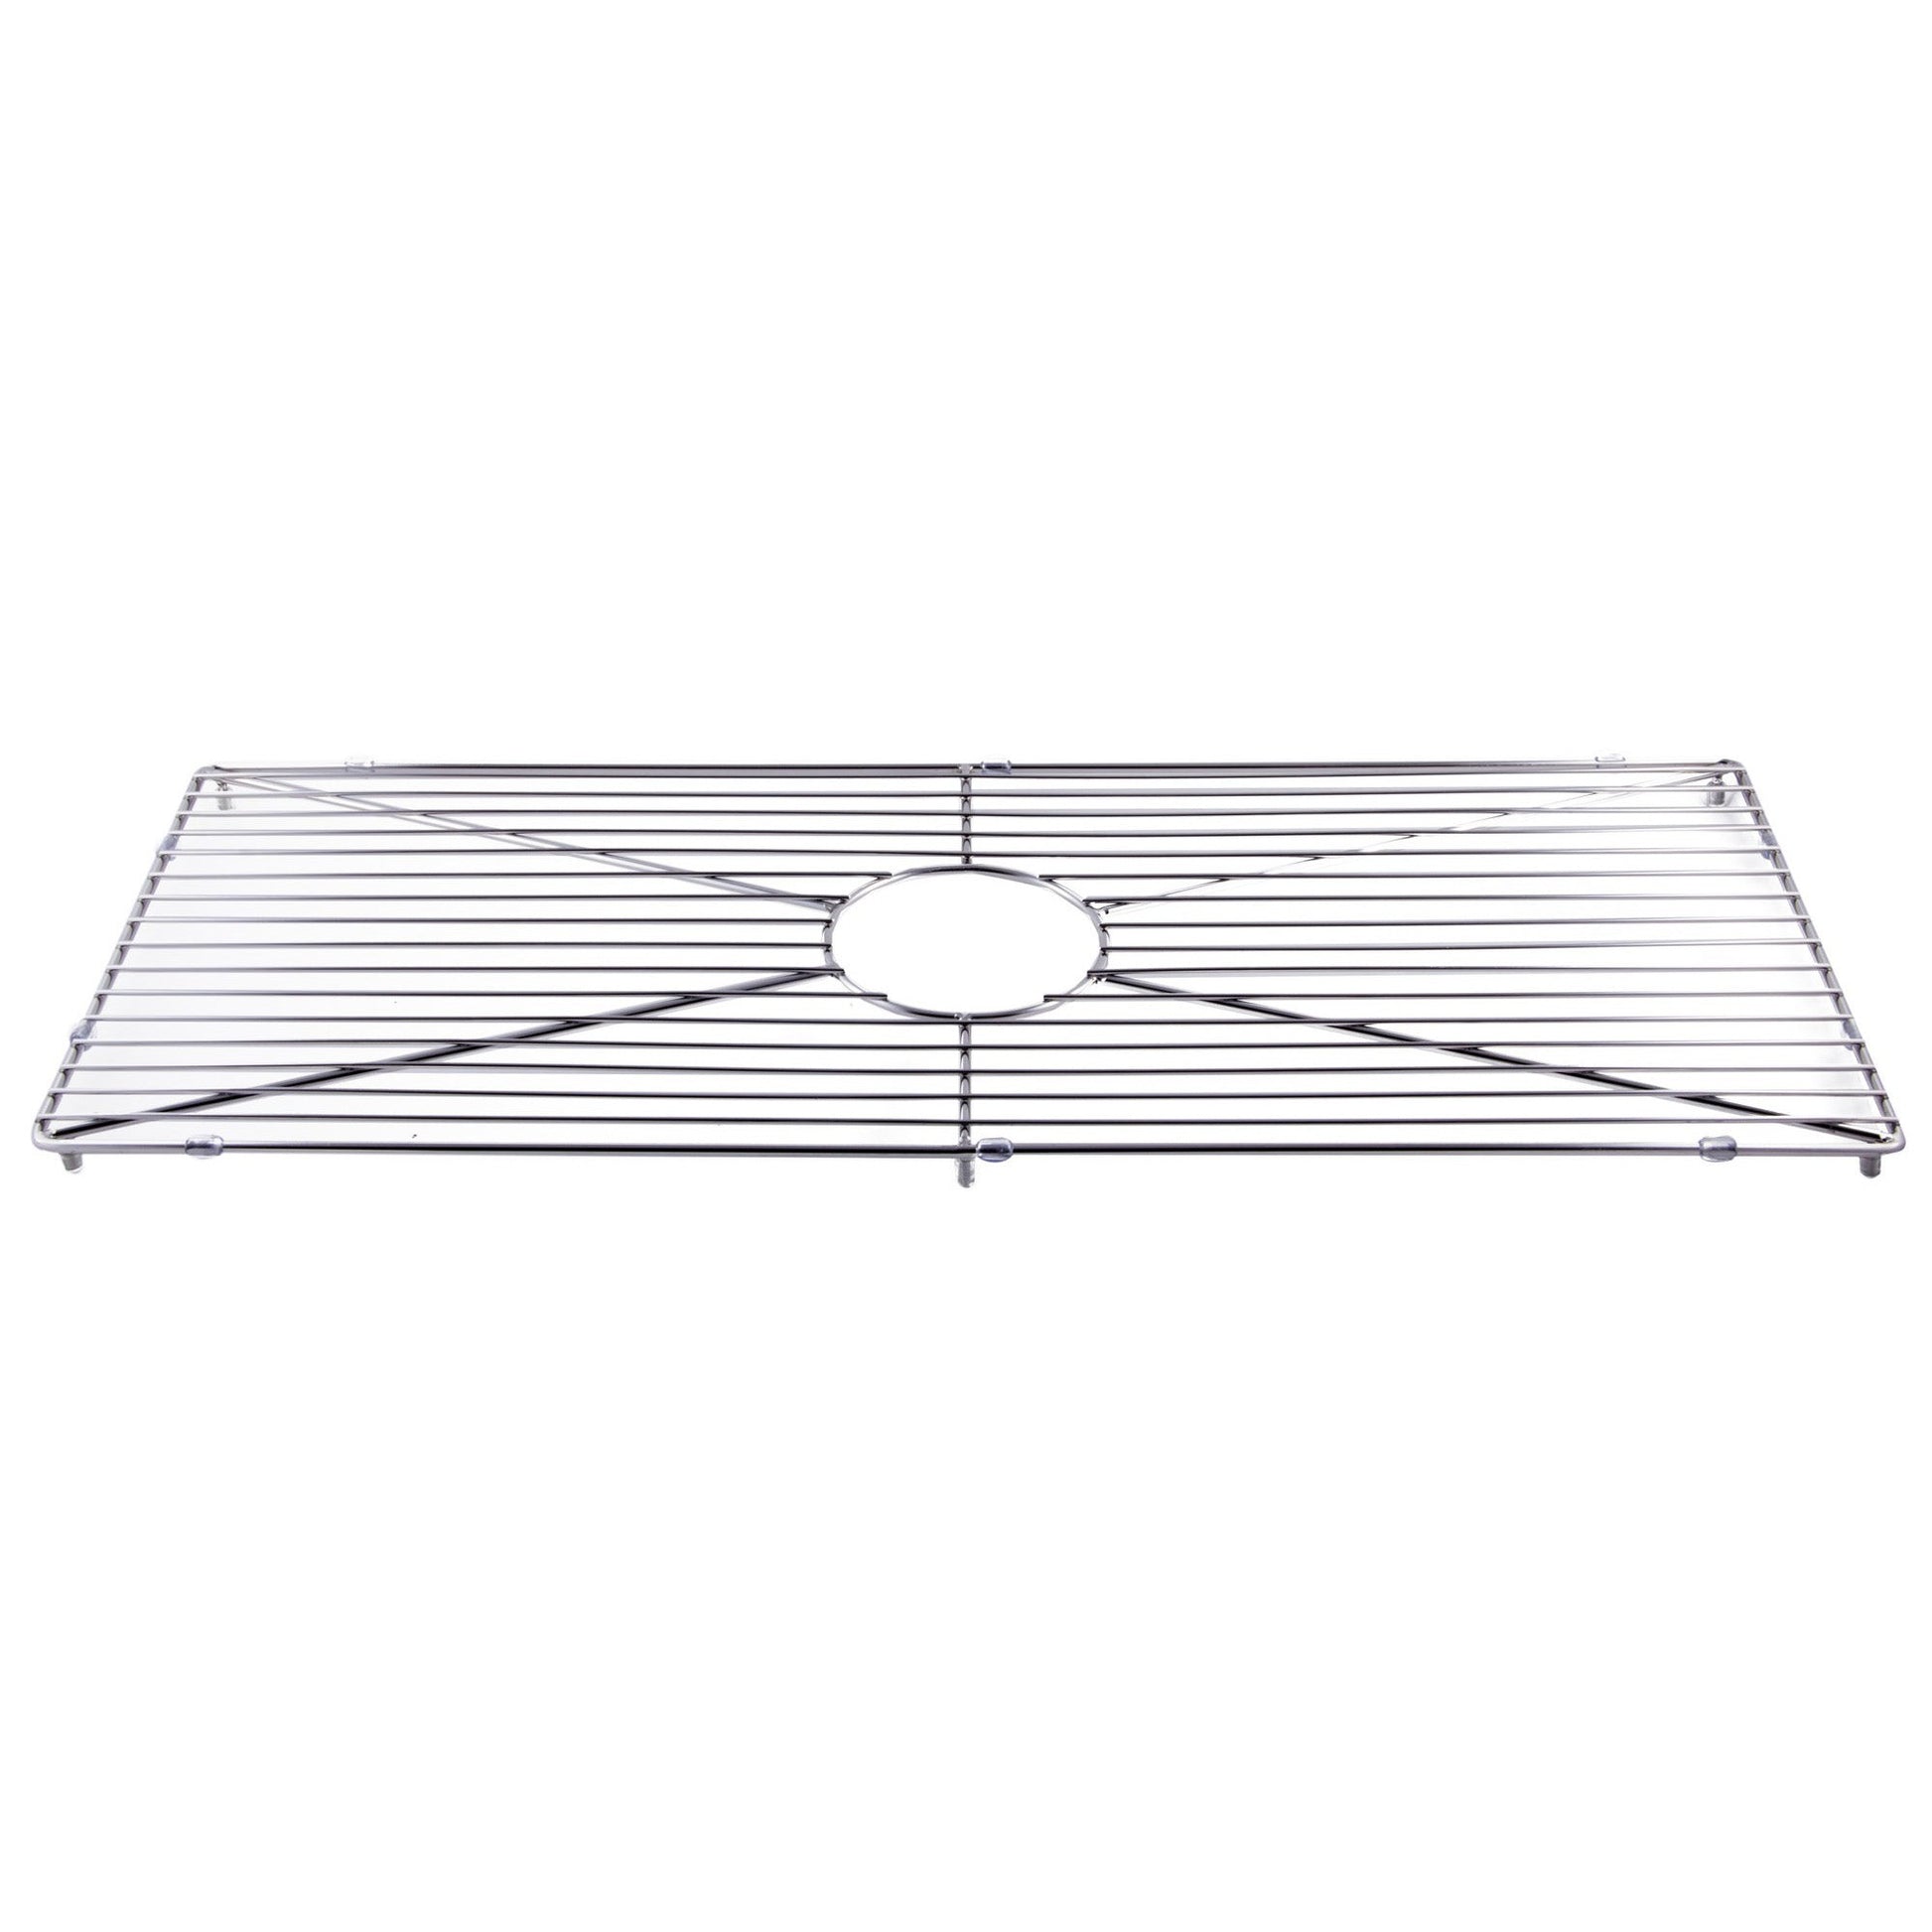 ALFI Brand ABGR3618H Stainless steel kitchen sink grid for AB3618HS